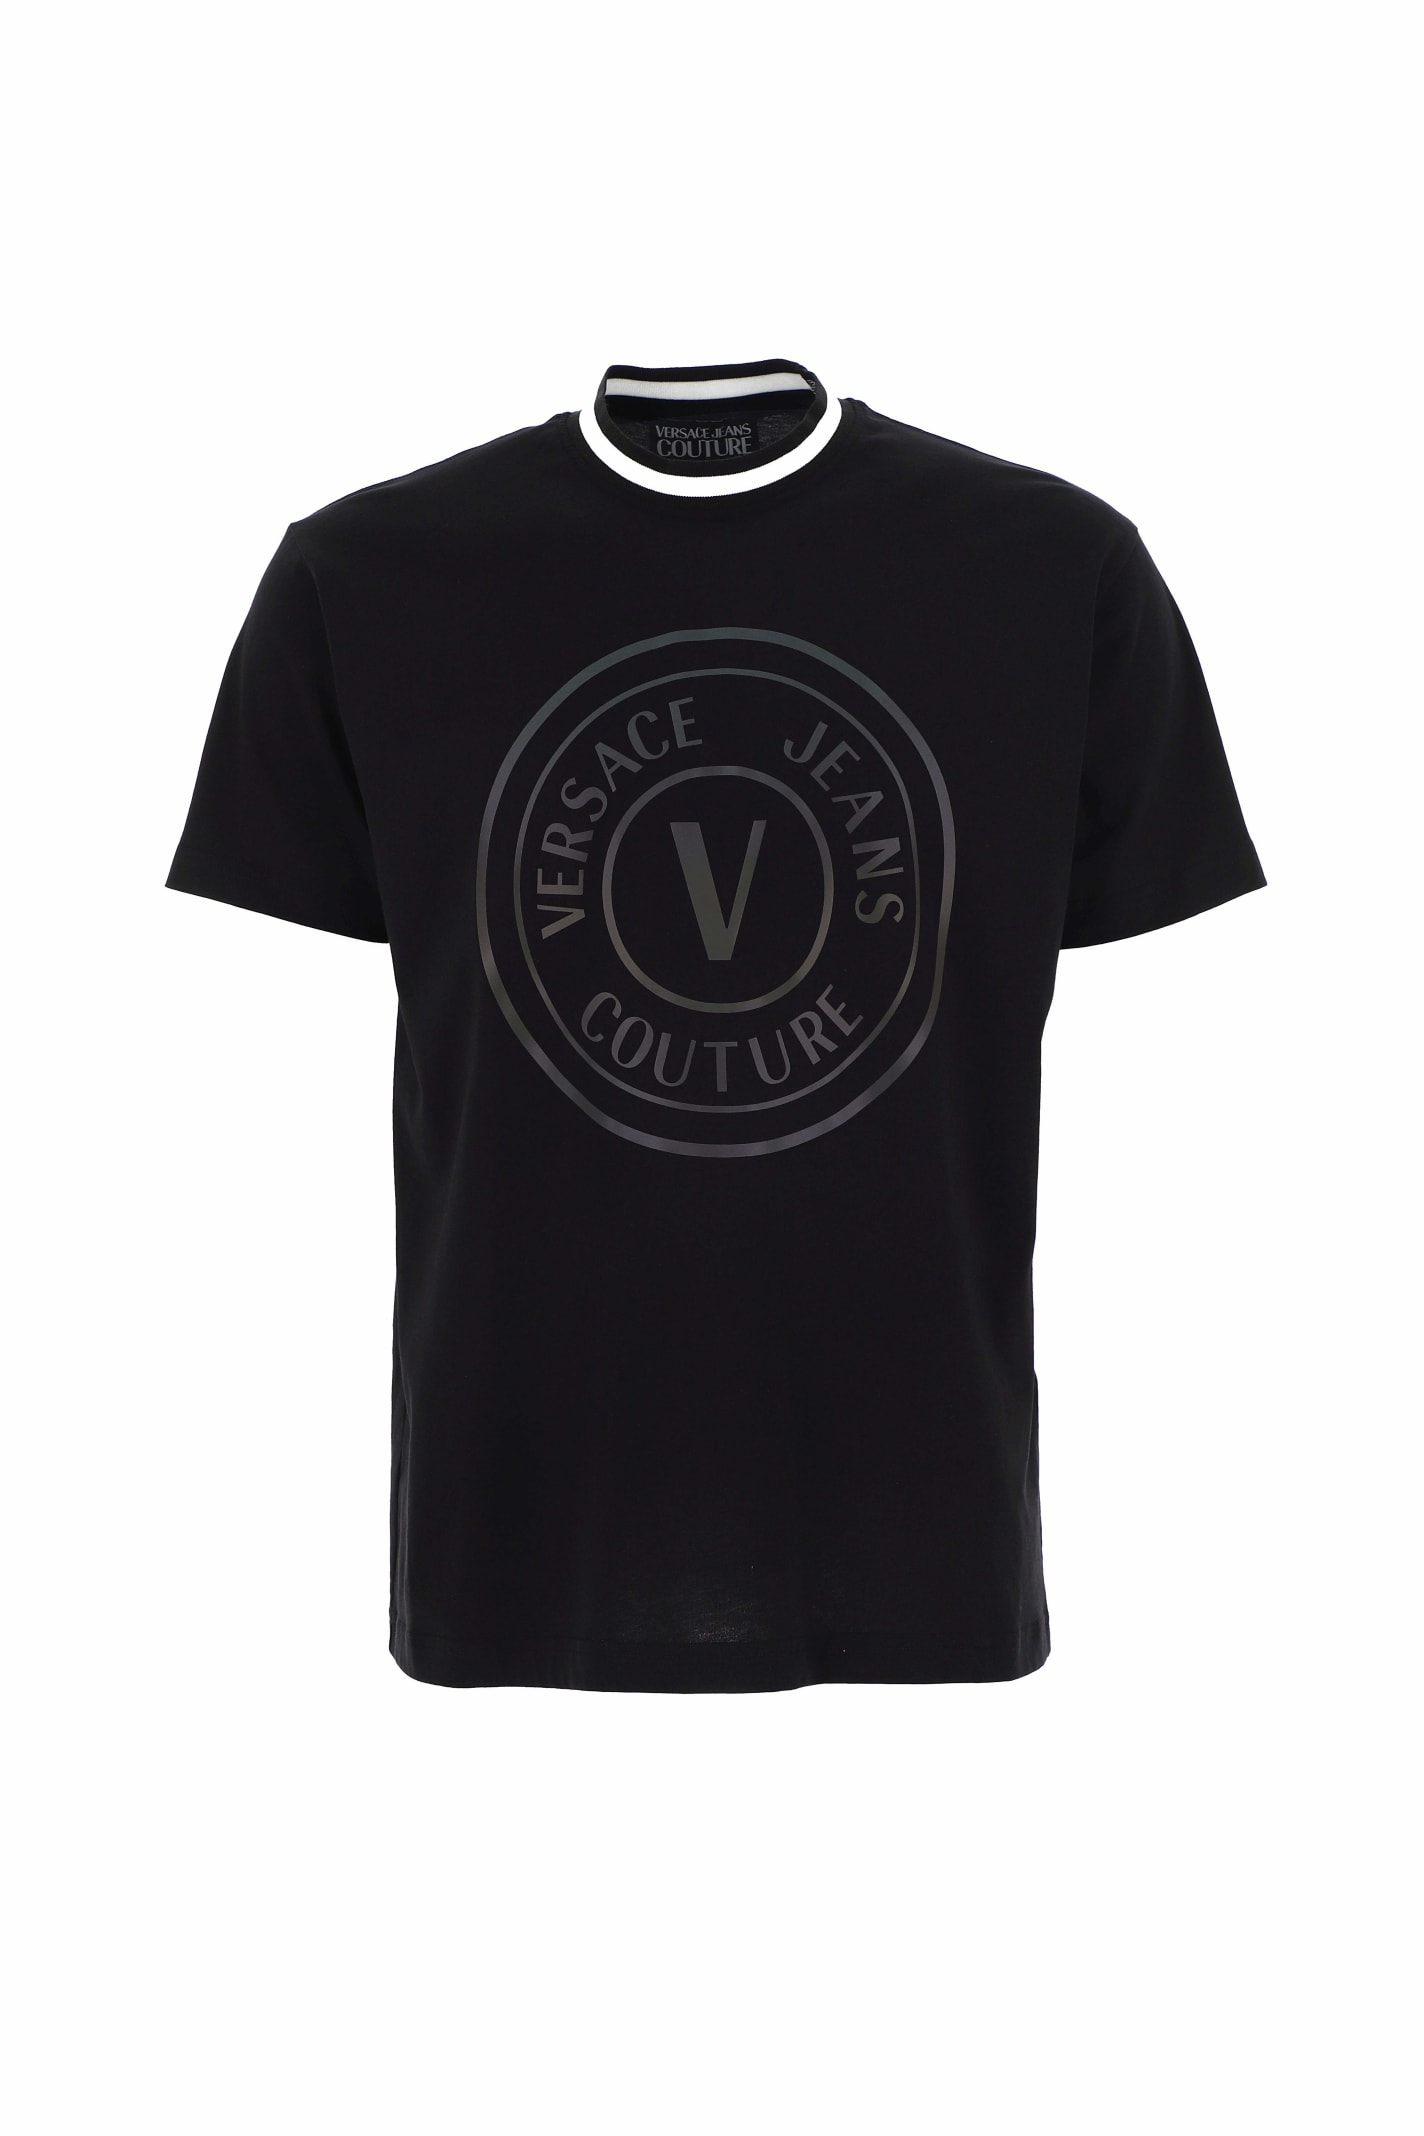 Versace Jeans Couture T-shirt 73up601 R 1 Vembl Flat Petrol Cotton Jersey In Black